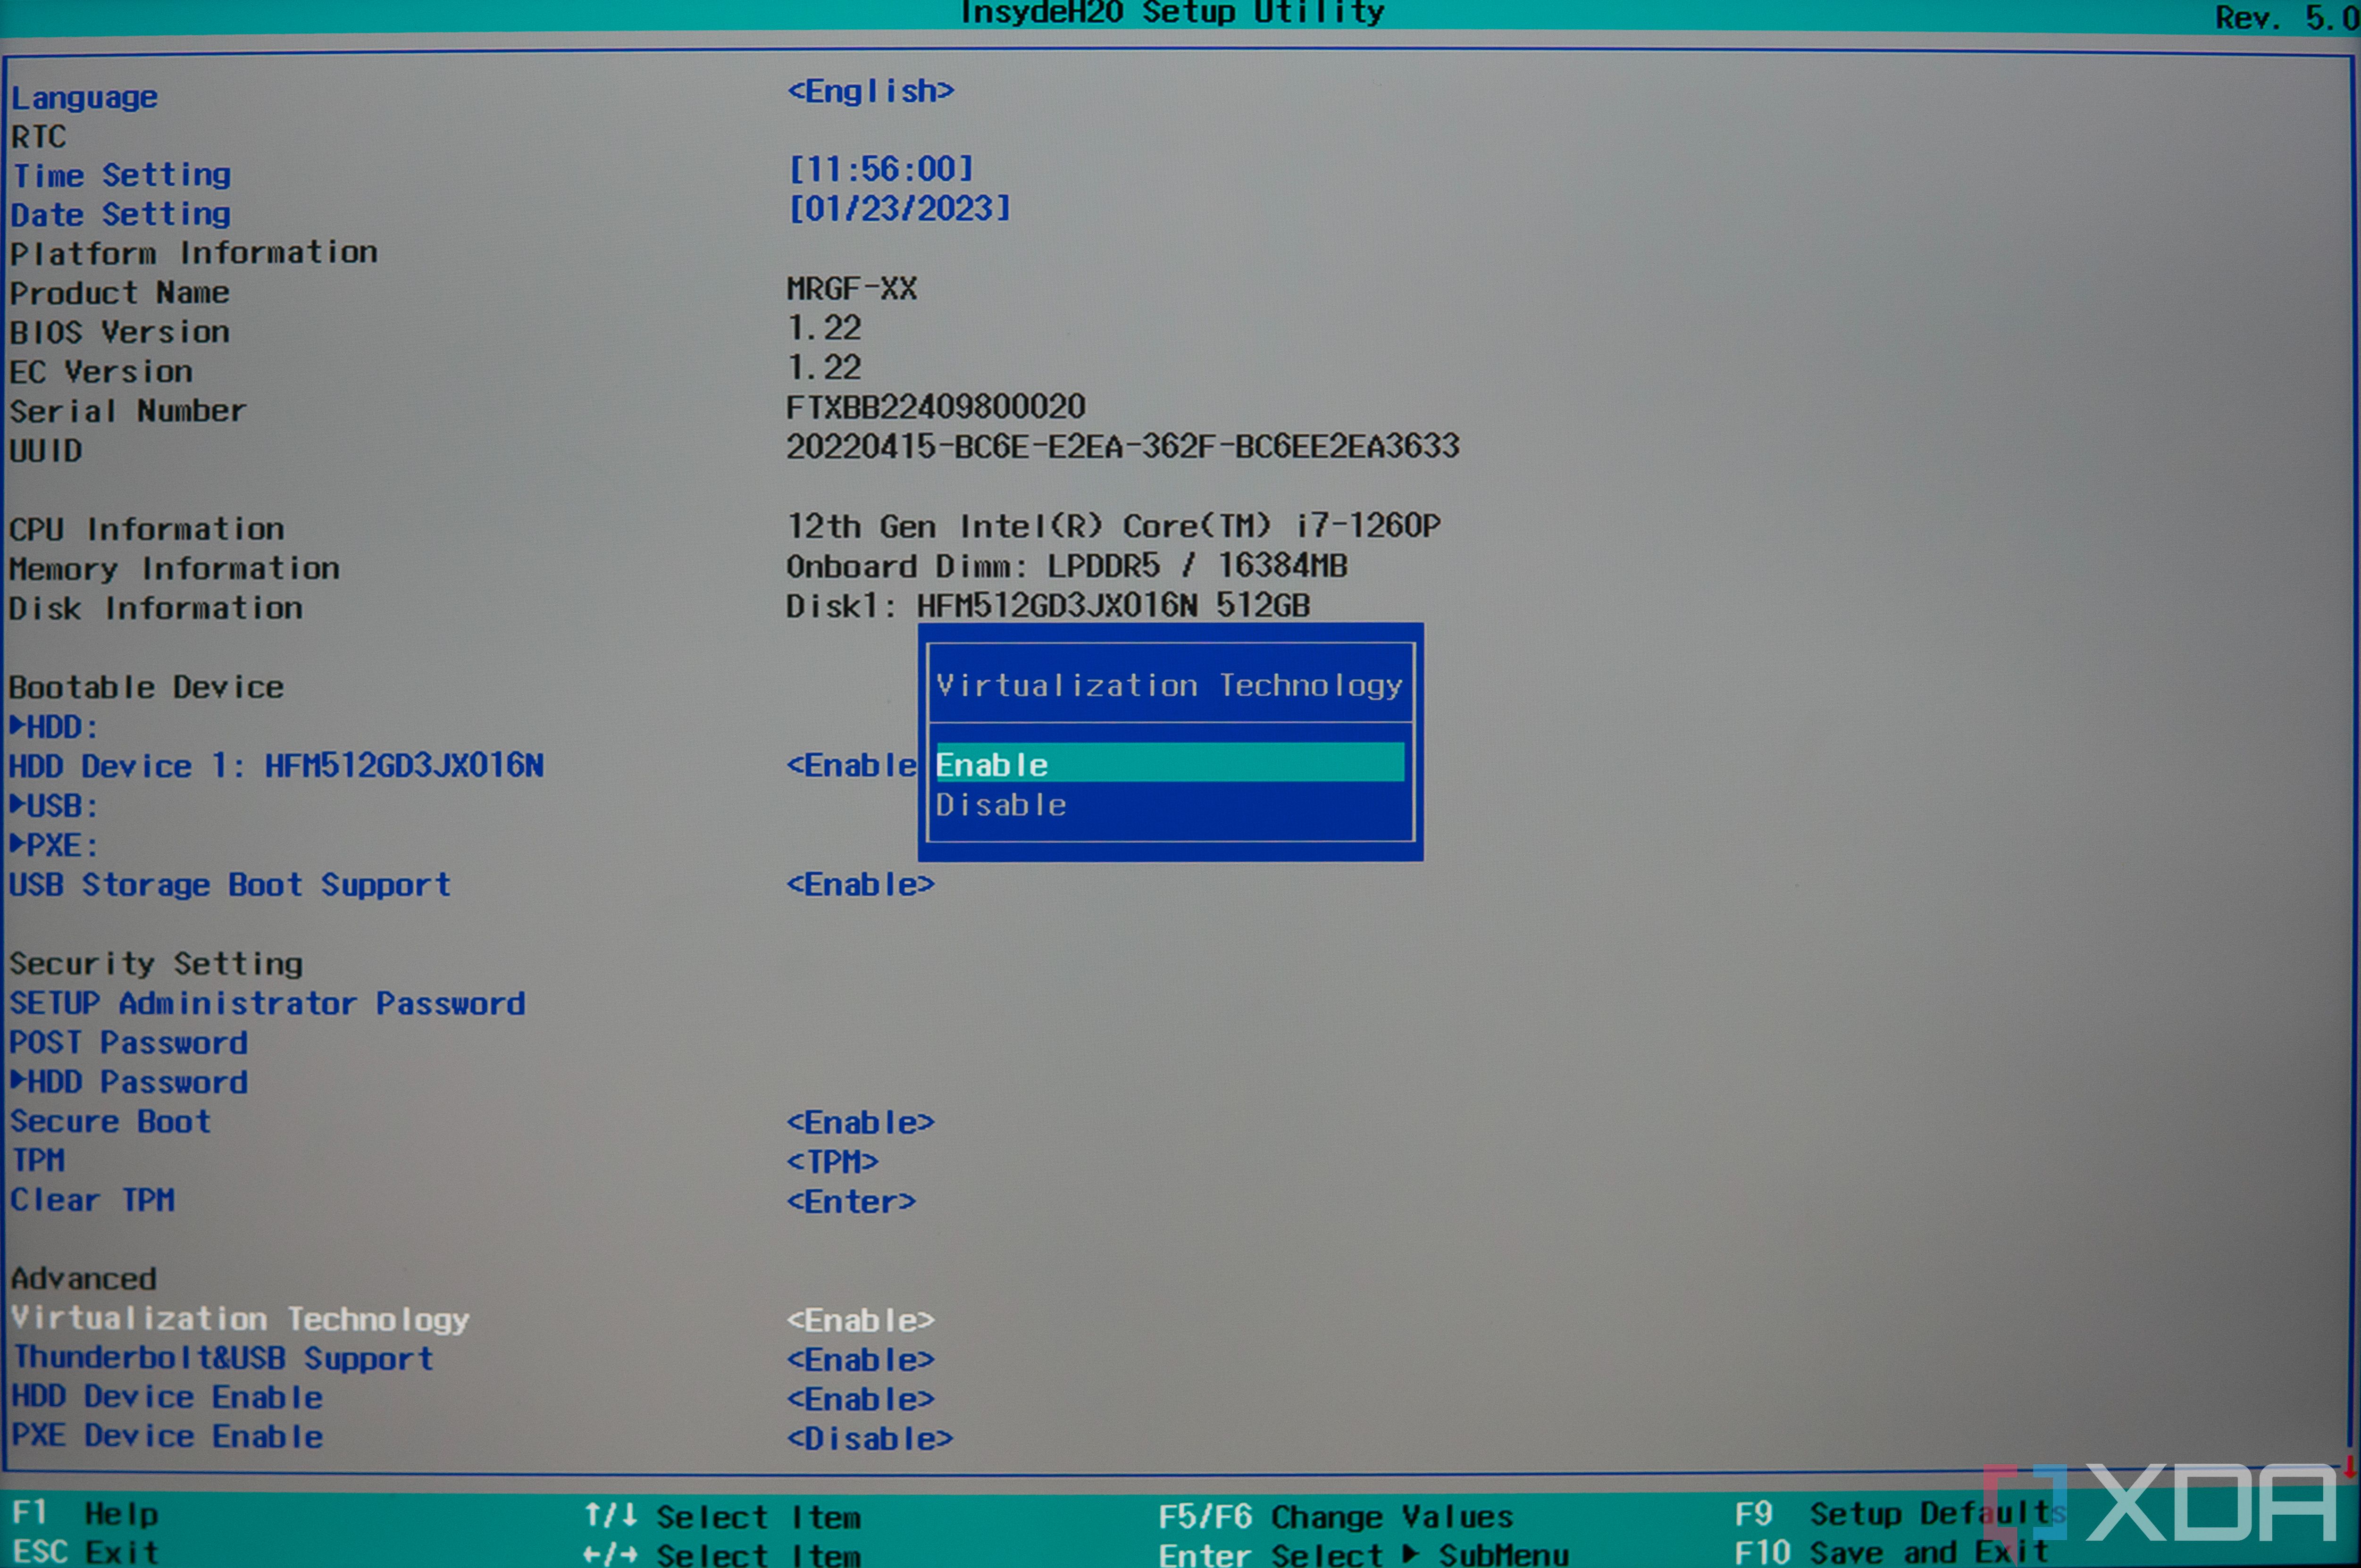 Screenshot of the computer's BIOS settings showing virtualization technology enabled